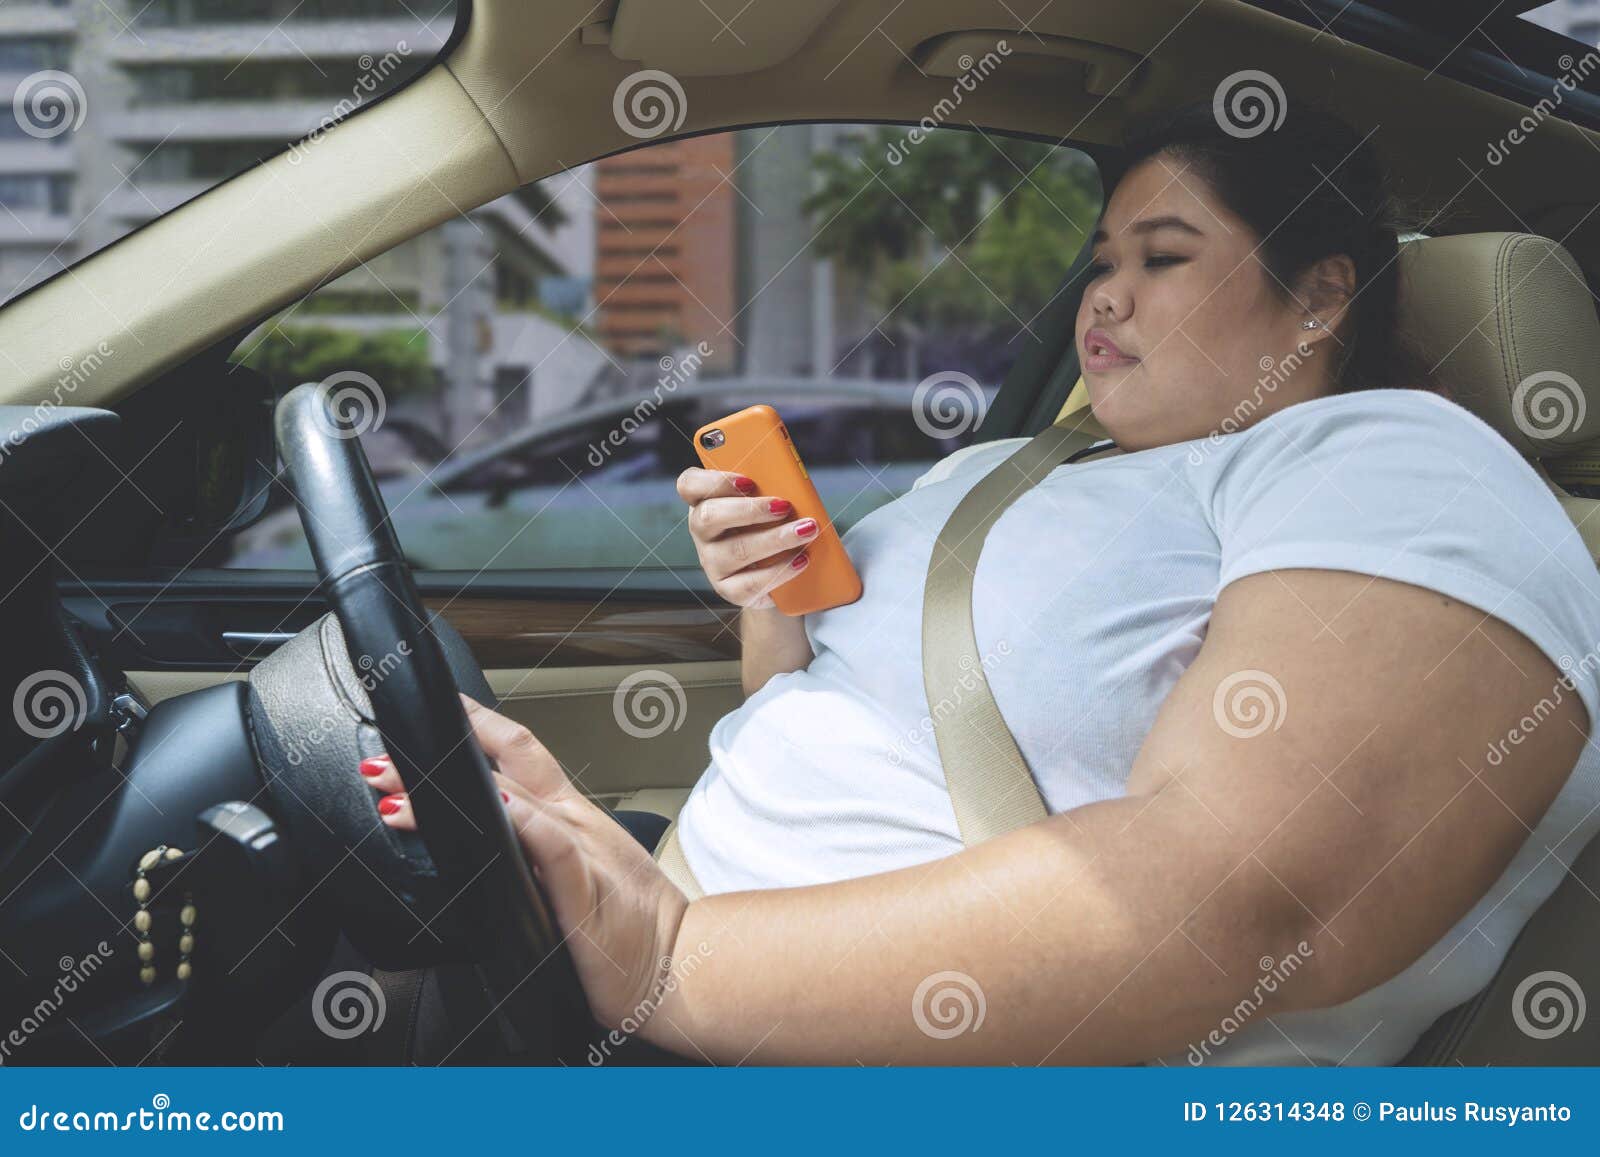 Asian Obese Woman Runs From Fast Food Offered Royalty Free Stock Image